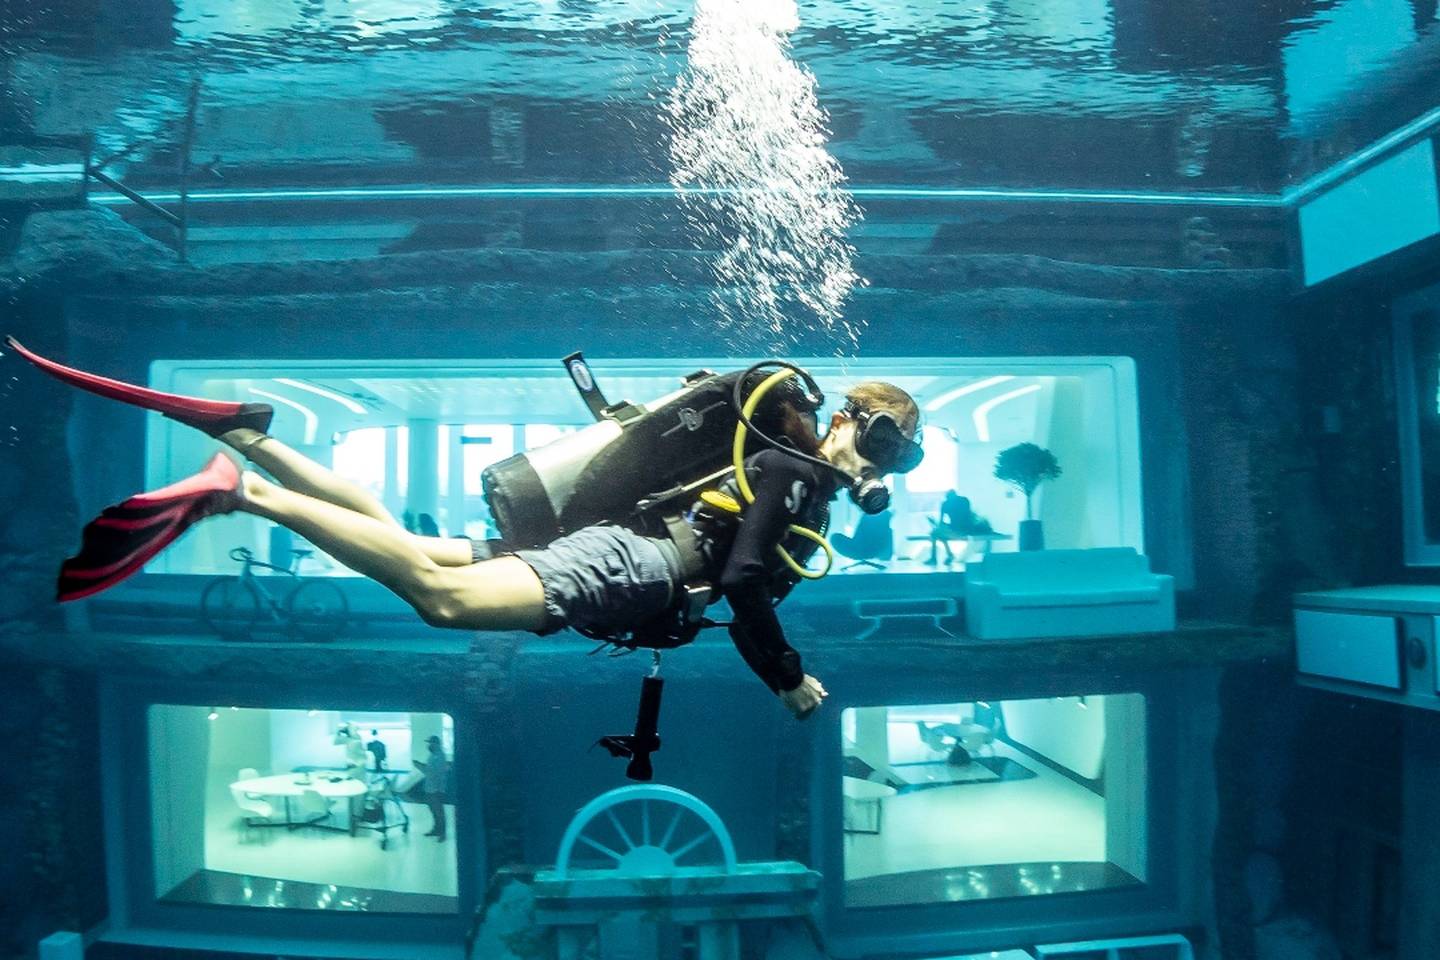 Could Dubai be the site of an underwater tennis court